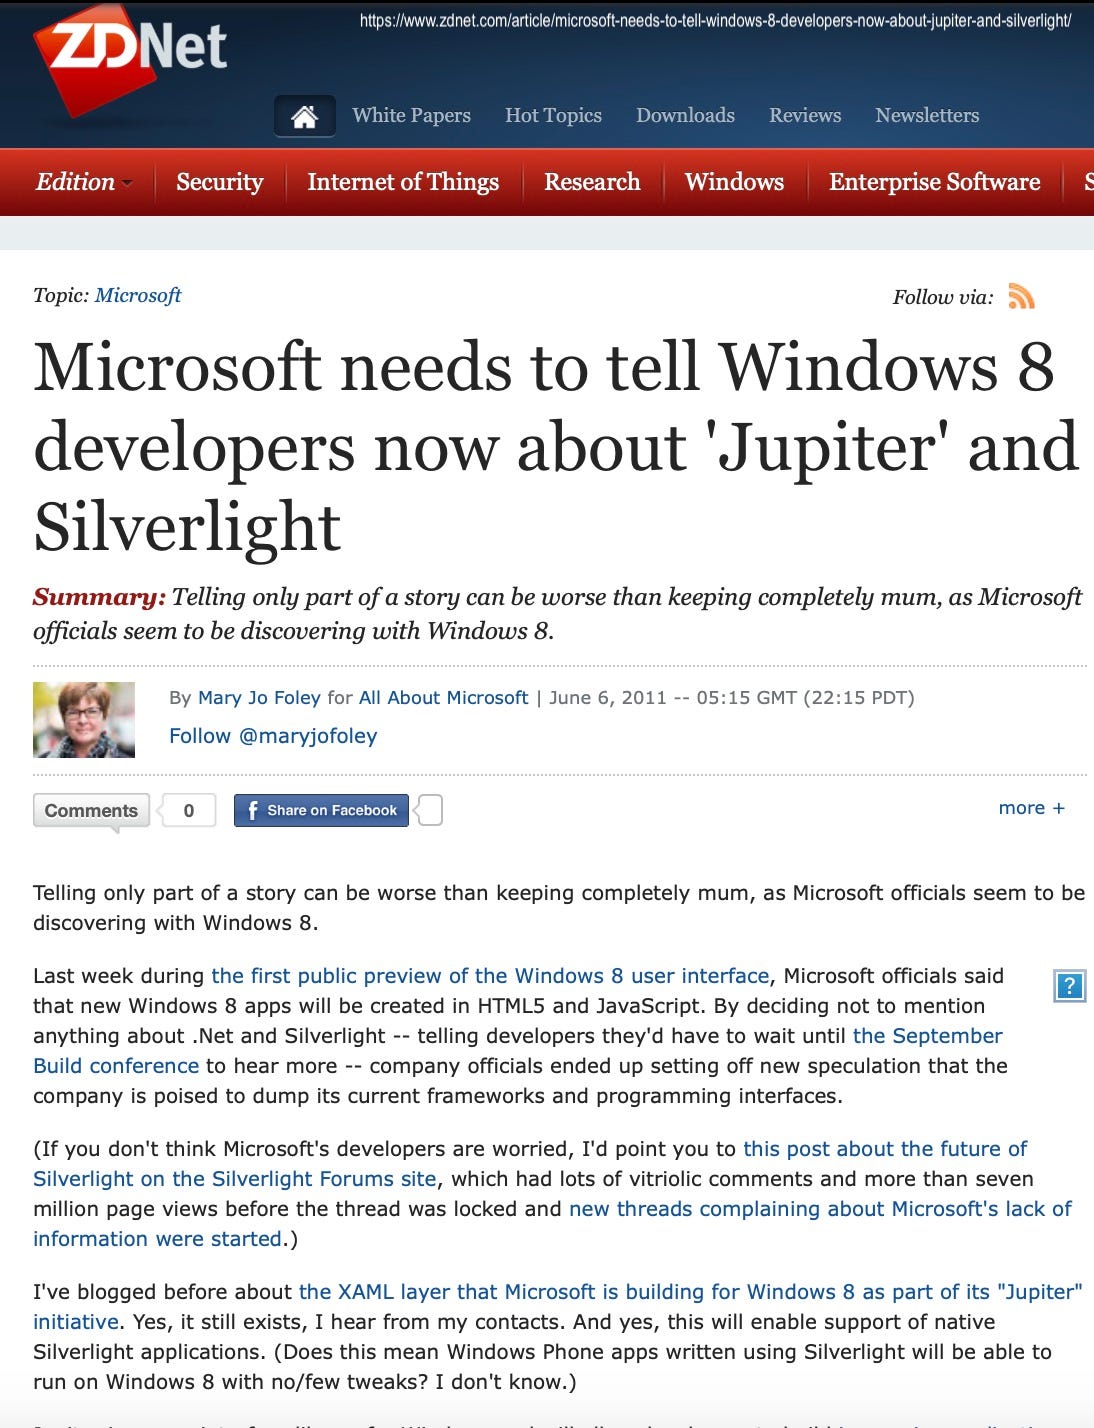 Microsoft needs to tell Windows 8 developers now about' 'Jupiter' and Silverlight Summary: Telling only part of a story can be worse than keeping completely mum, as Microsoft officials seem to be discovering with Windows 8. By Mary Jo Foley for All About Microsoft | June 6, 2011 - 05:15 GMT (22:15 PDT) Follow @maryjofoley Comments 0 F Share on Facebook more + Telling only part of a story can be worse than keeping completely mum, as Microsoft officials seem to be discovering with Windows 8. Last week during the first public preview of the Windows 8 user interface, Microsoft officials said that new Windows 8 apps will be created in HTML5 and JavaScript. By deciding not to mention anything about Net and Silverlight -- telling developers they'd have to wait until the September Build conference to hear more -- company officials ended up setting off new speculation that the company is poised to dump its current frameworks and programming interfaces. (If you don't think Microsoft's developers are worried, I'd point you to this post about the future of Silverlight on the Silverlight Forums site, which had lots of vitriolic comments and more than seven million page views before the thread was locked and new threads complaining about Microsoft's lack of information were started.) I've blogged before about the XAML layer that Microsoft is building for Windows 8 as part of its "Jupiter" initiative. Yes, it still exists, I hear from my contacts. And yes, this will enable support of native Silverlight applications. (Does this mean Windows Phone apps written using Silverlight will be able to run on Windows 8 with no/few tweaks? I don't know.)